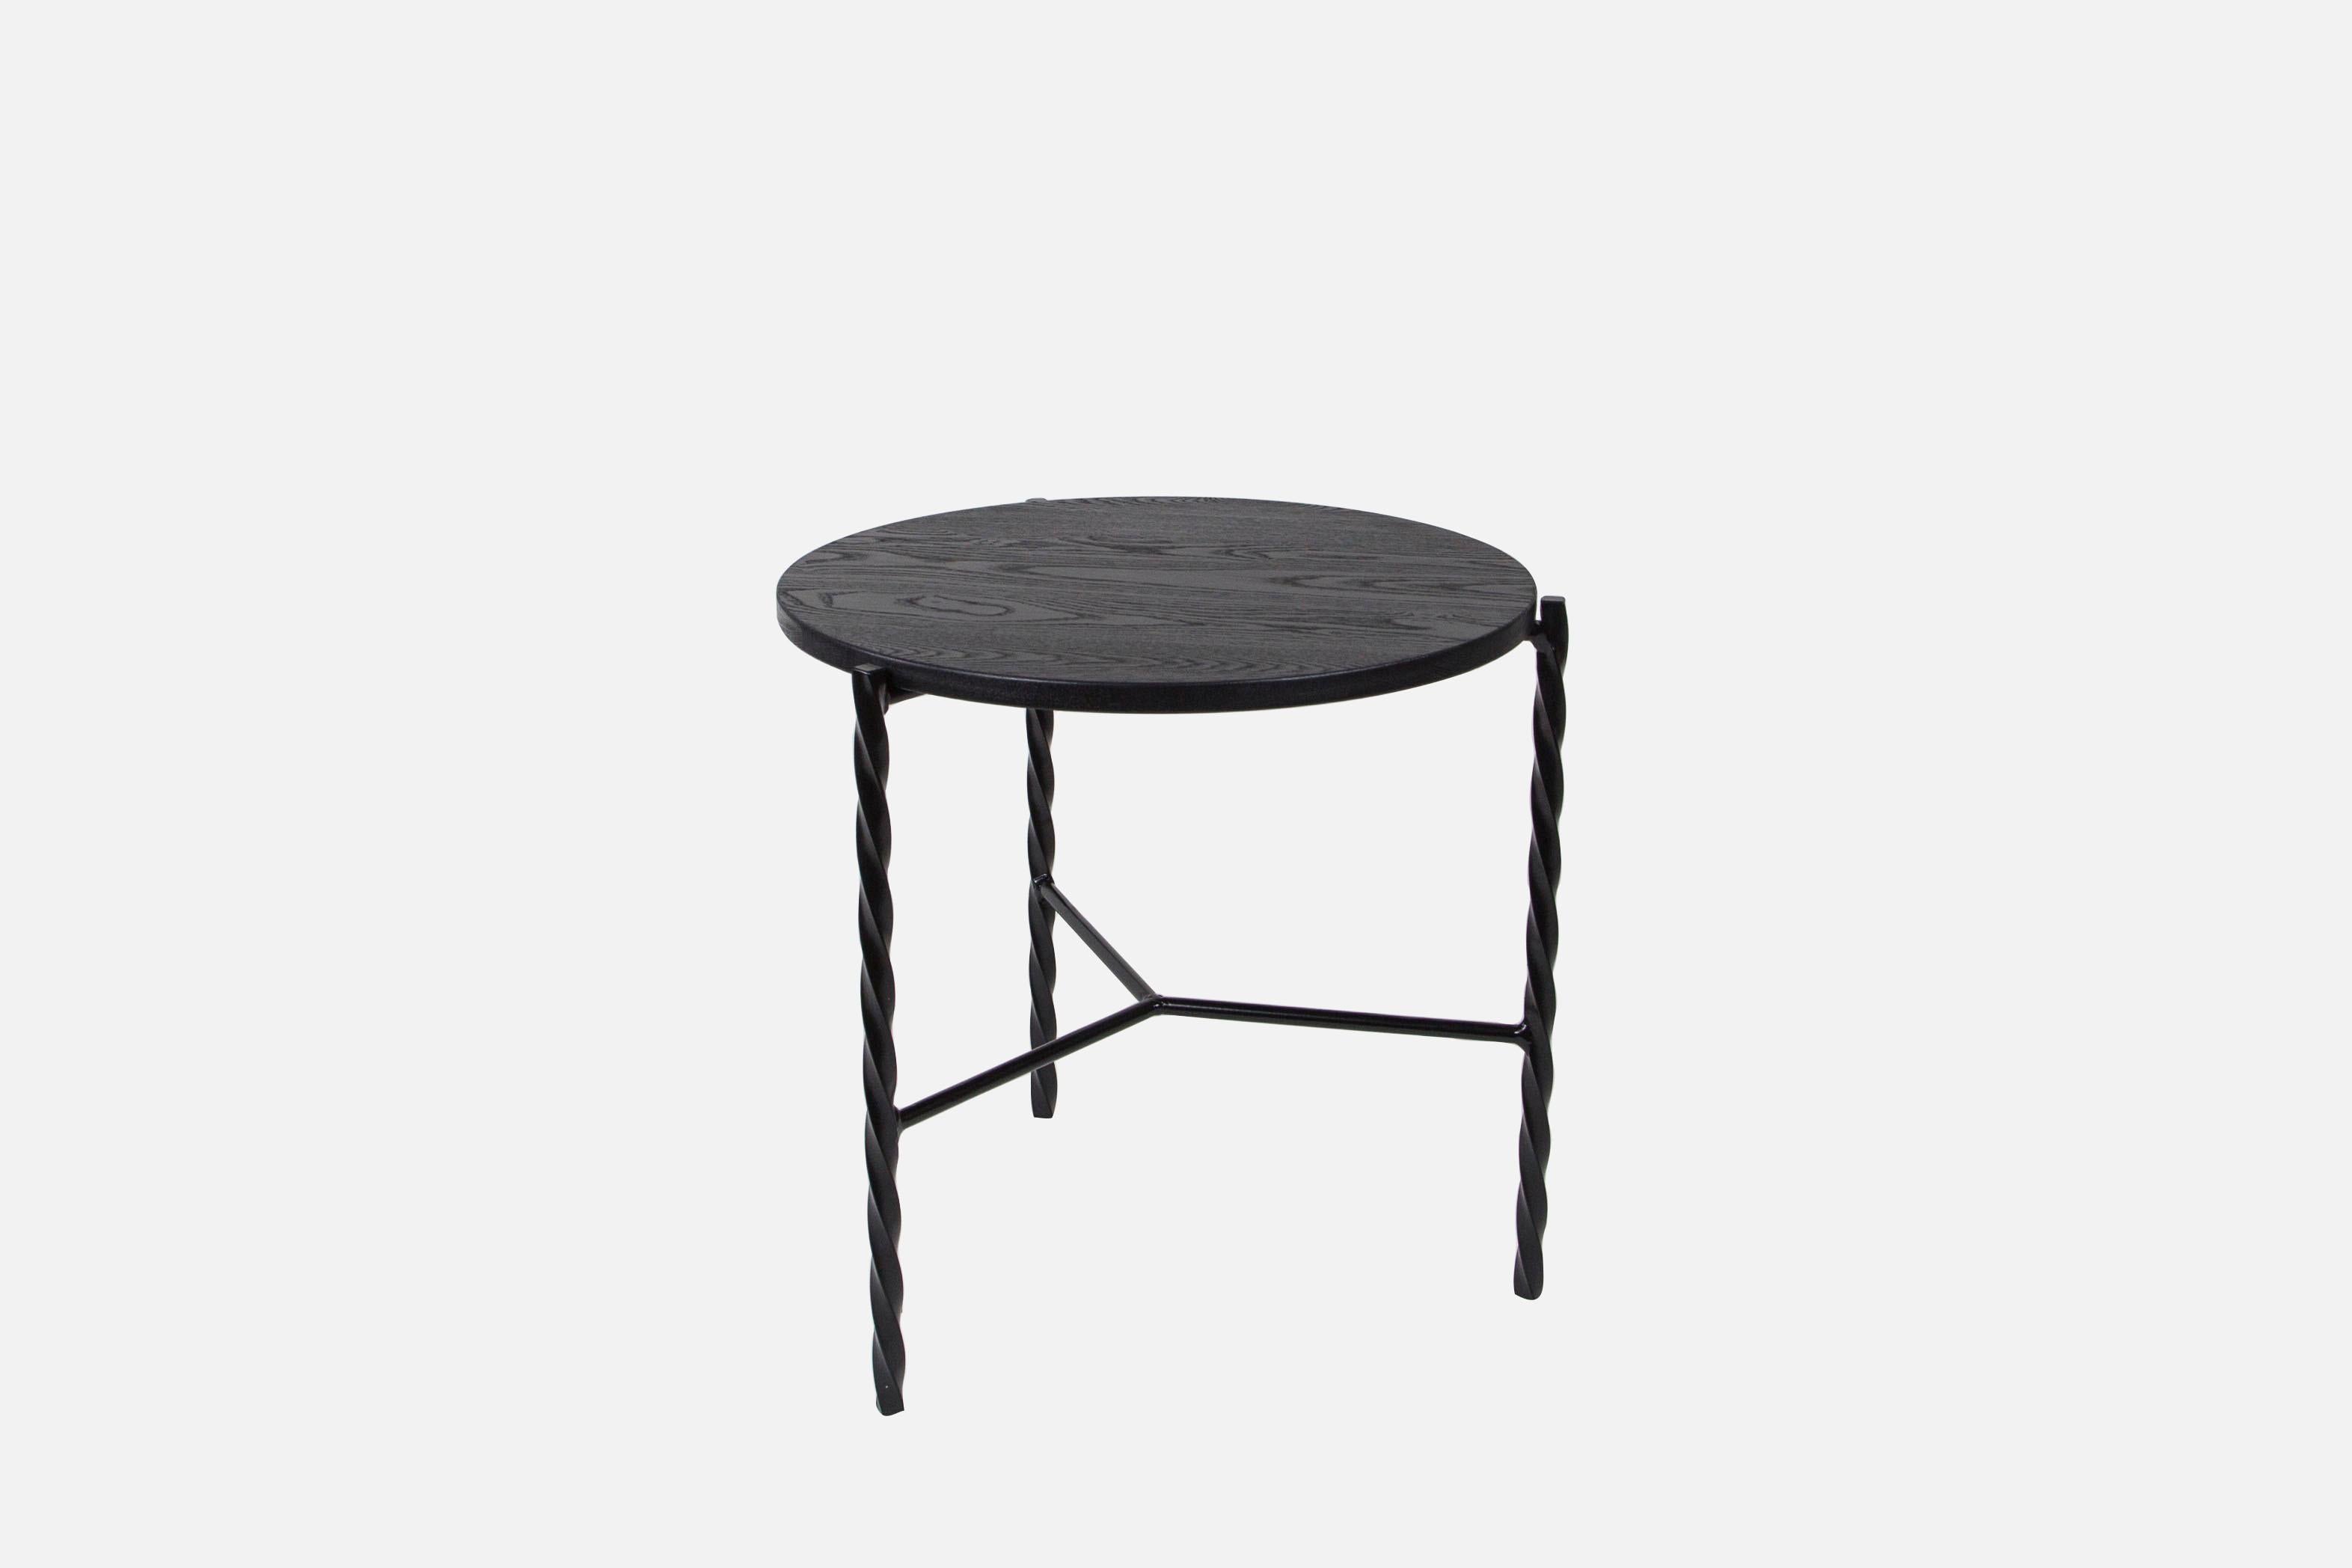 Powder-Coated Von Iron Coffee Table from Souda, Carrara Marble Top, Made to Order For Sale